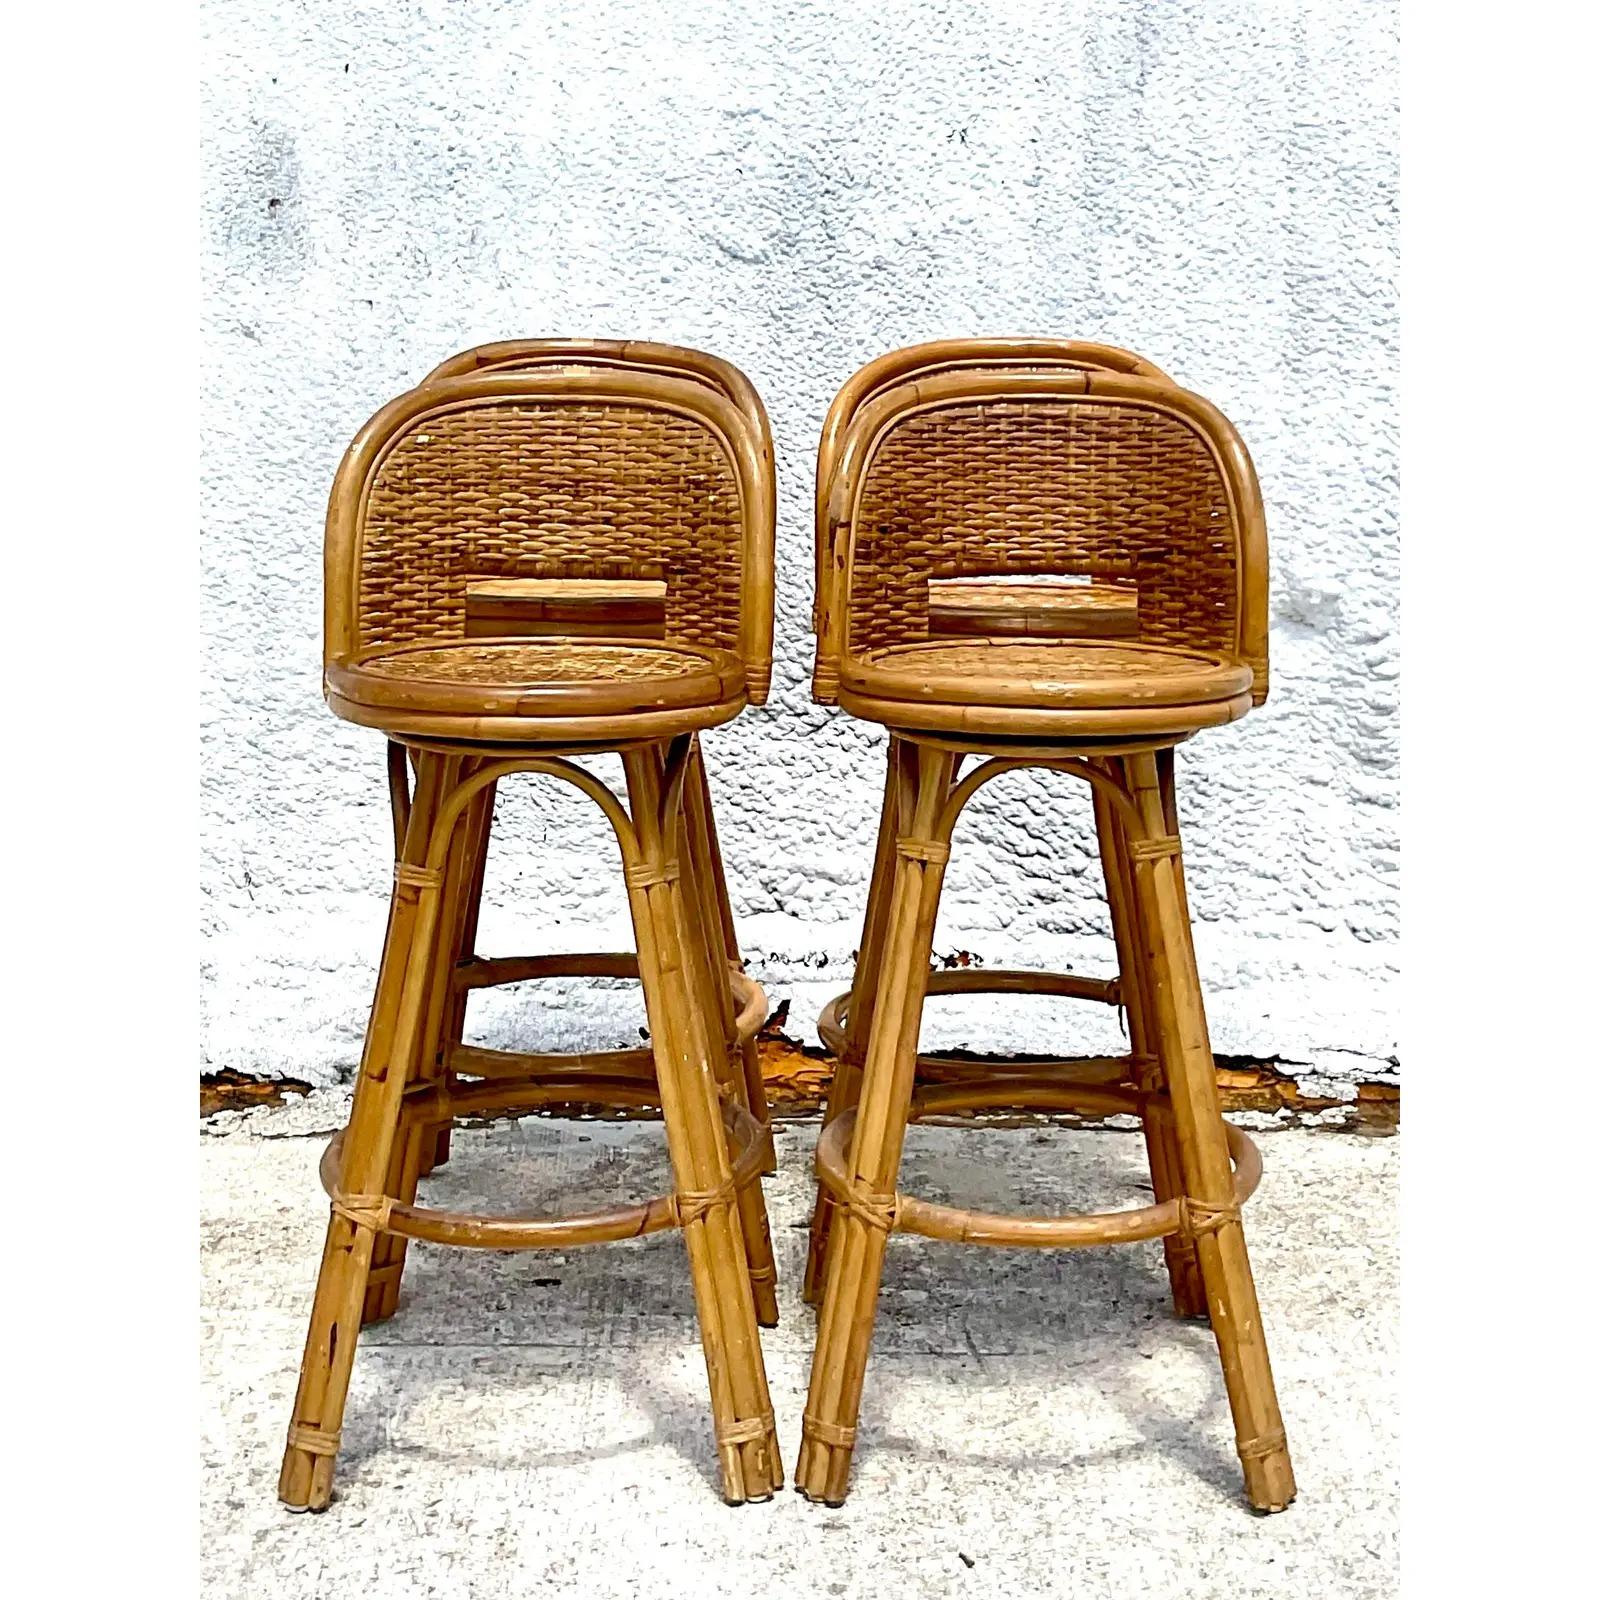 Fantastic set of four vintage Coastal bar stools. Beautiful wrap around swivel seats with inset woven rattan panels. Chic and simple. Acquired from a Palm Beach estate.